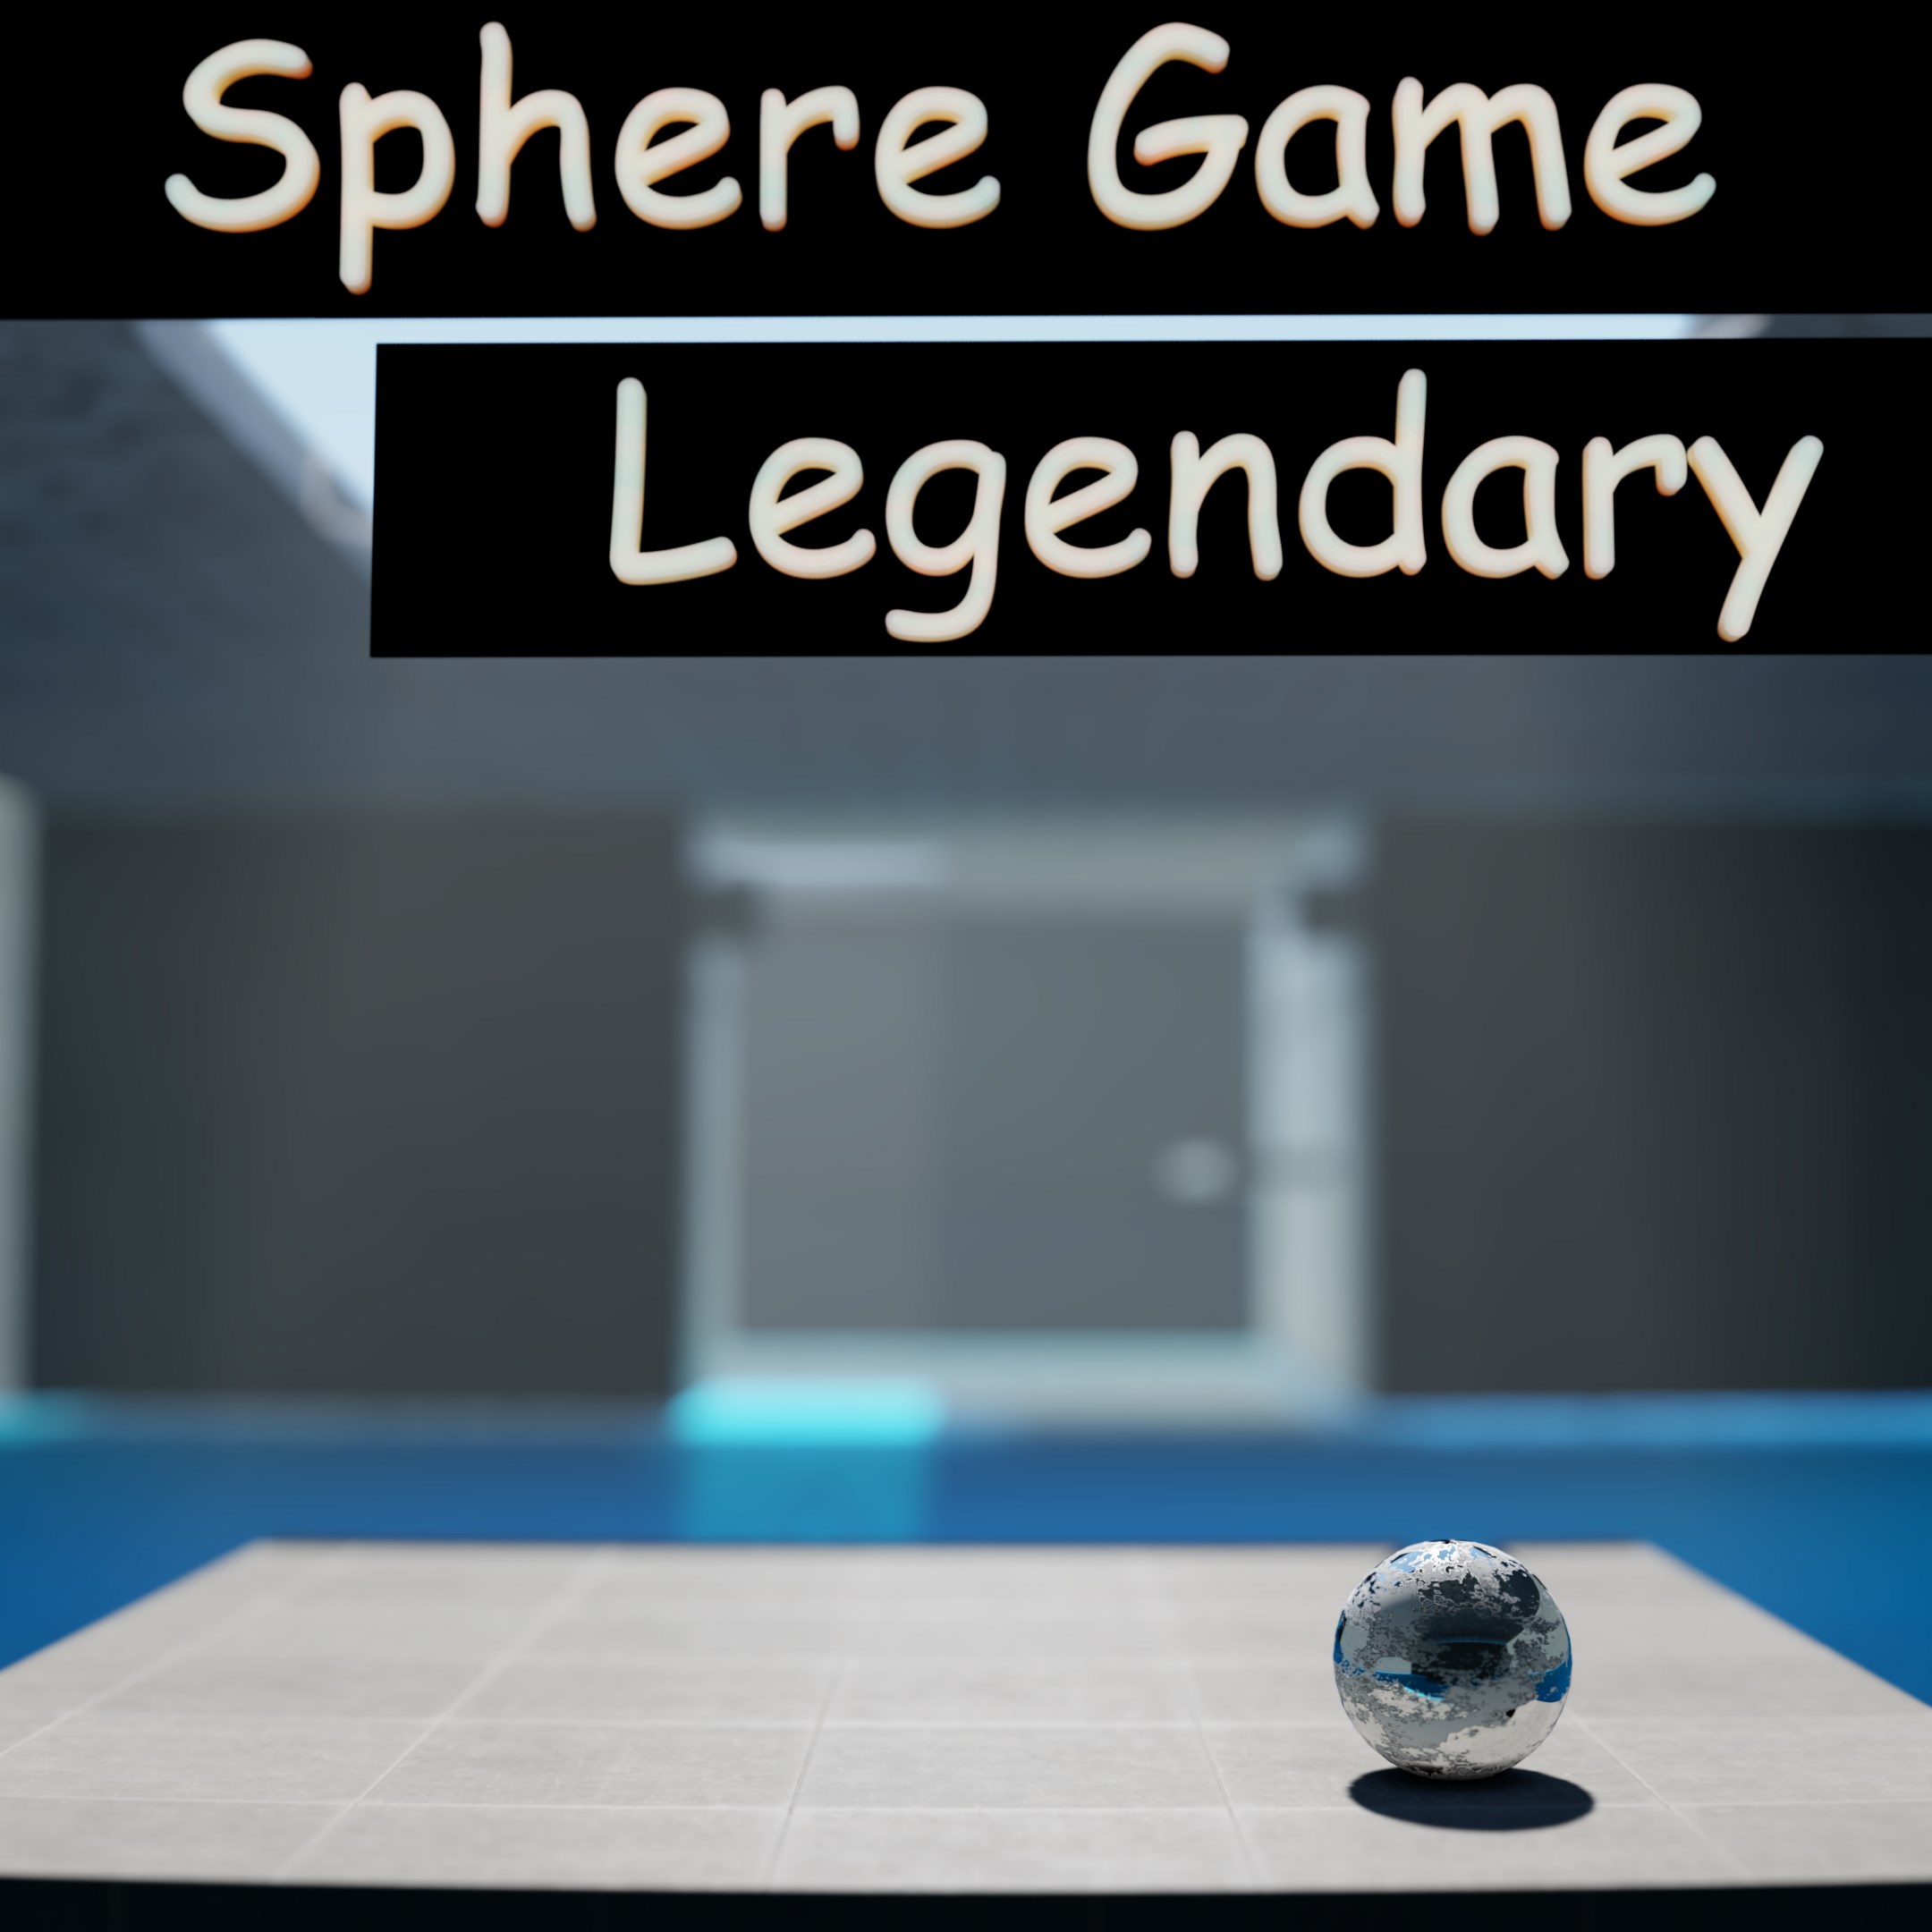 Sphere Game Legendary technical specifications for laptop